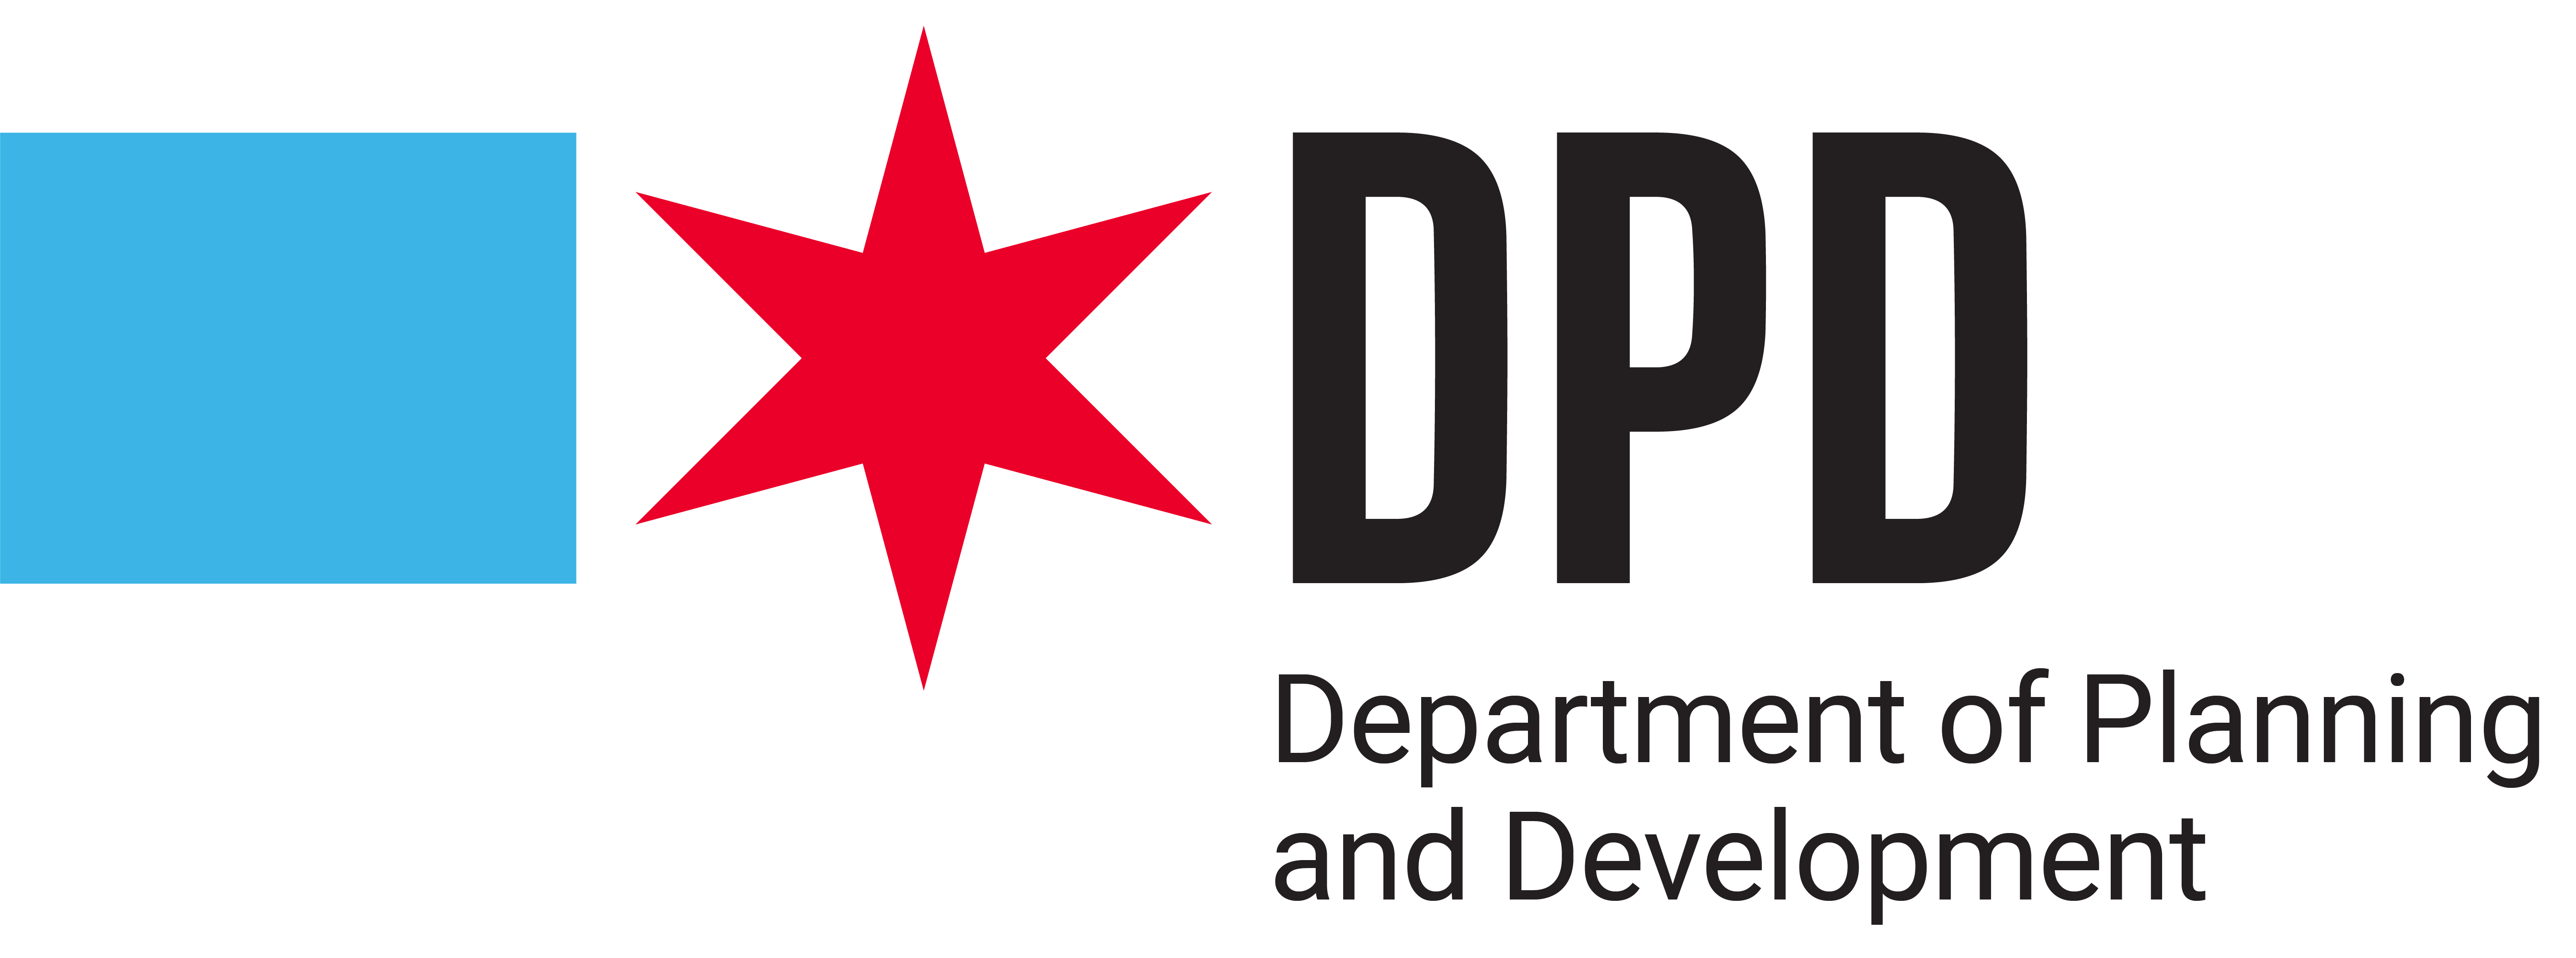 Chicago Department of Planning and Development